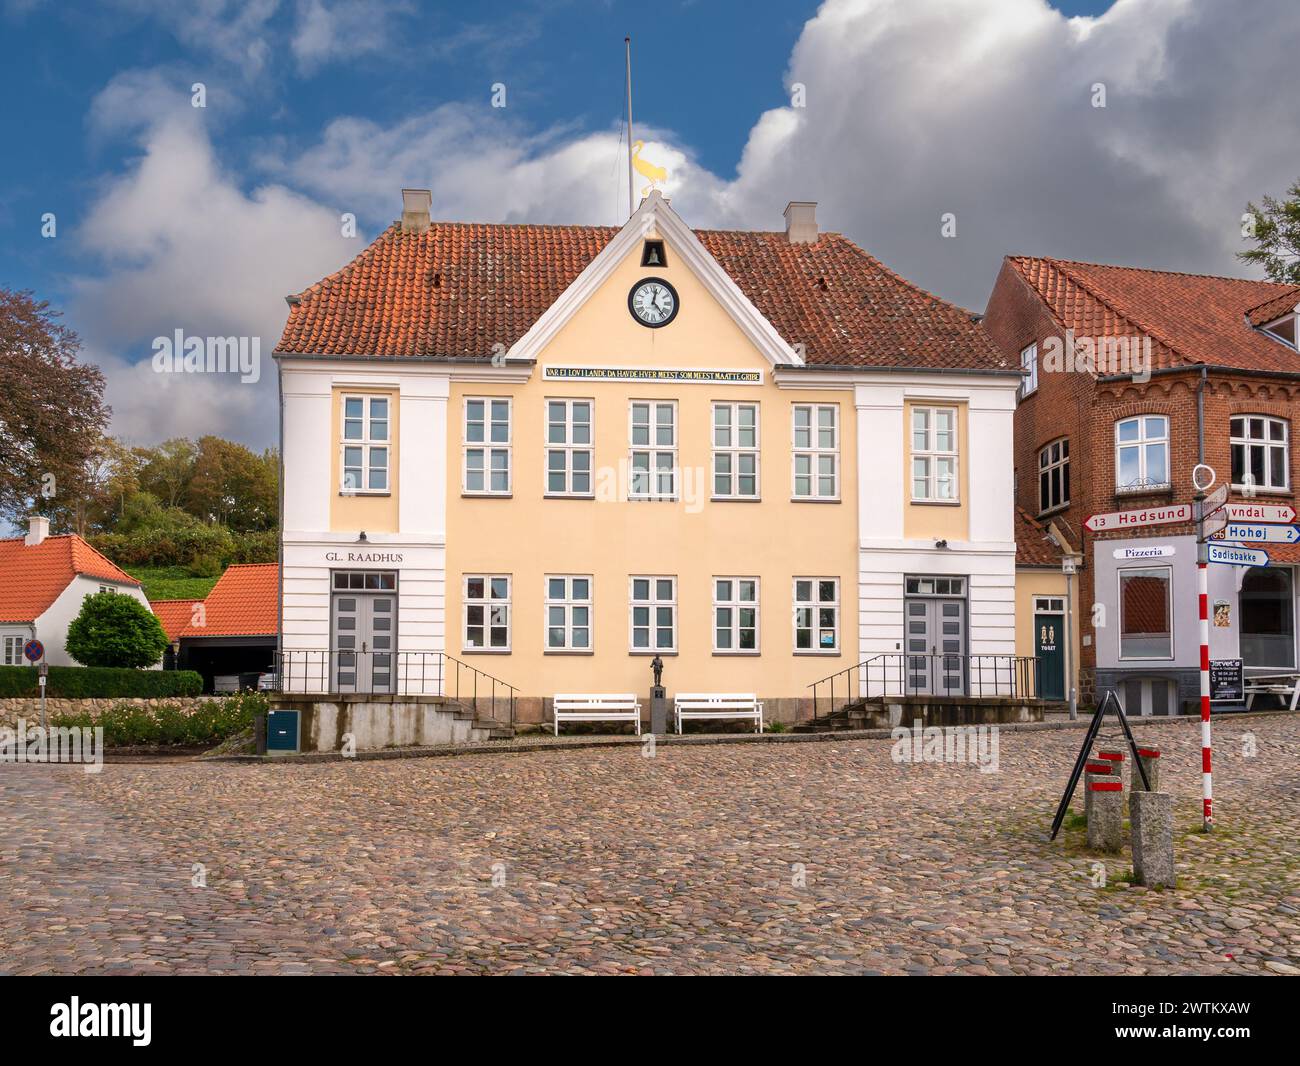 Former town hall on cobblestoned Torvet square in old town of Mariager, Nordjylland, Denmark Stock Photo